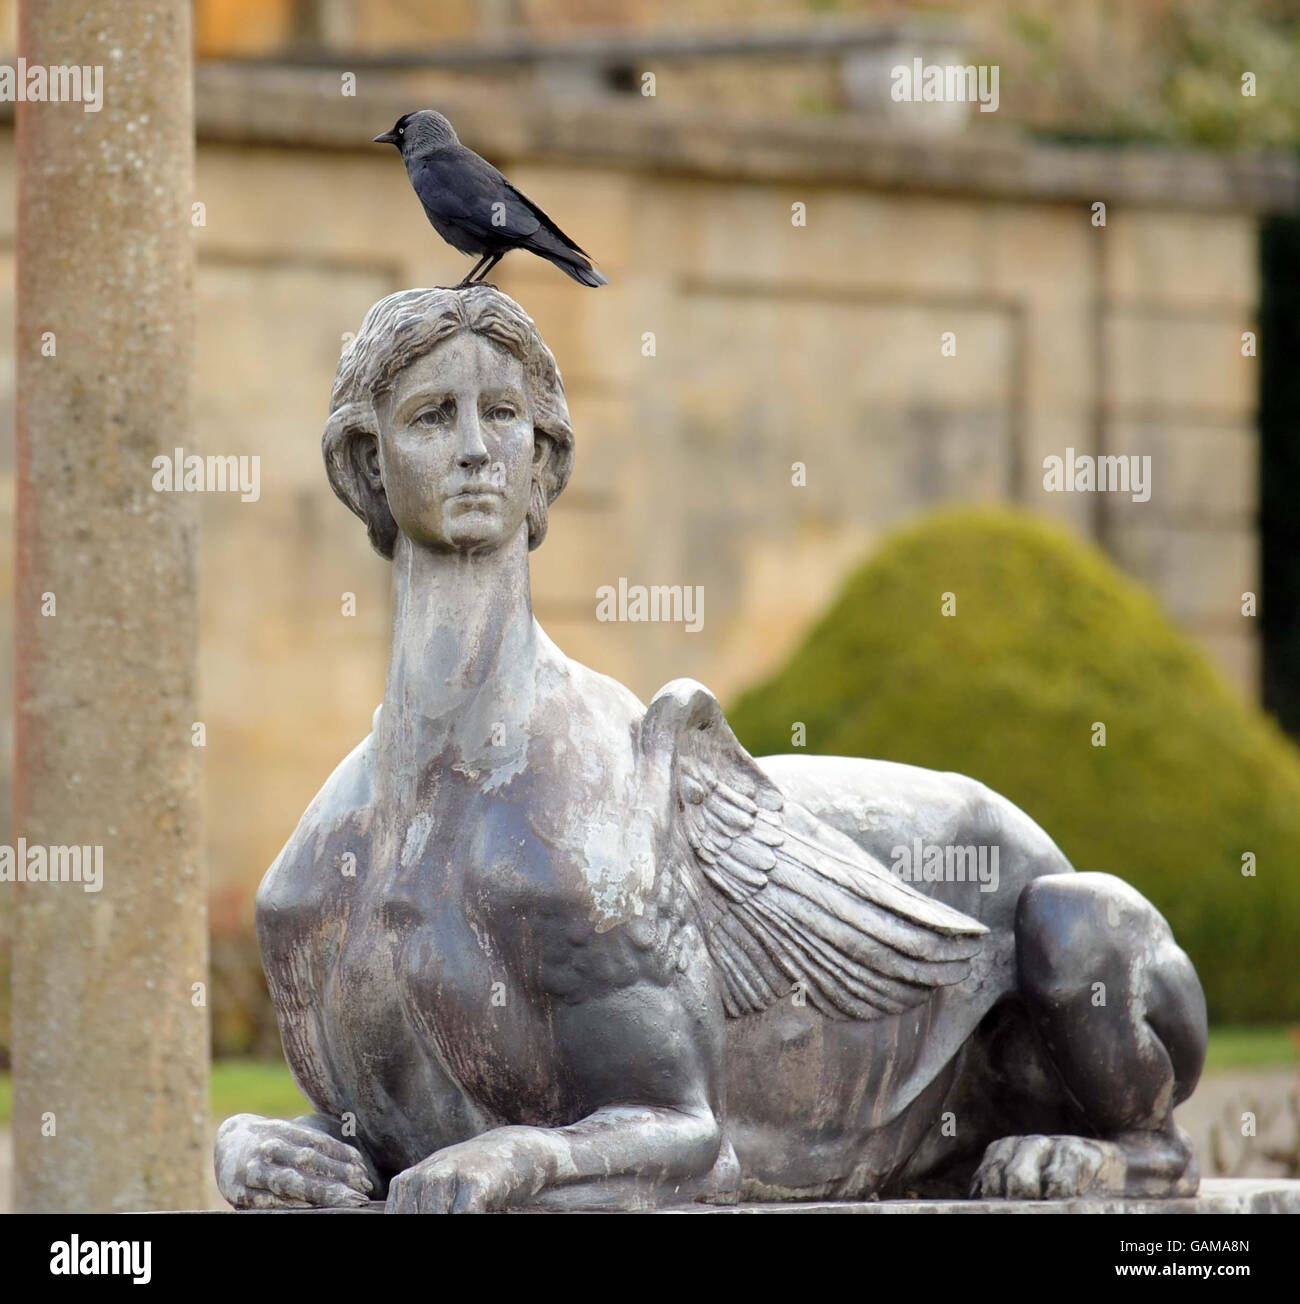 A bird stands on a sphinx of Gladys Deacon, the first wife of the 9th Duke of Marlborough that is displayed at Blenheim Palace, Woodstock, Oxfordshire, in the Lower Water Terraces of the Palace. A panel of six striking eyes showing three blue and three brown, painted in 1928 for Gladys Deacon have been restored and gaze mysteriously down on visitors as they enter the Palace, they had suffered the elements and deteriorated over the years, and have now been returned to their former glory. Stock Photo